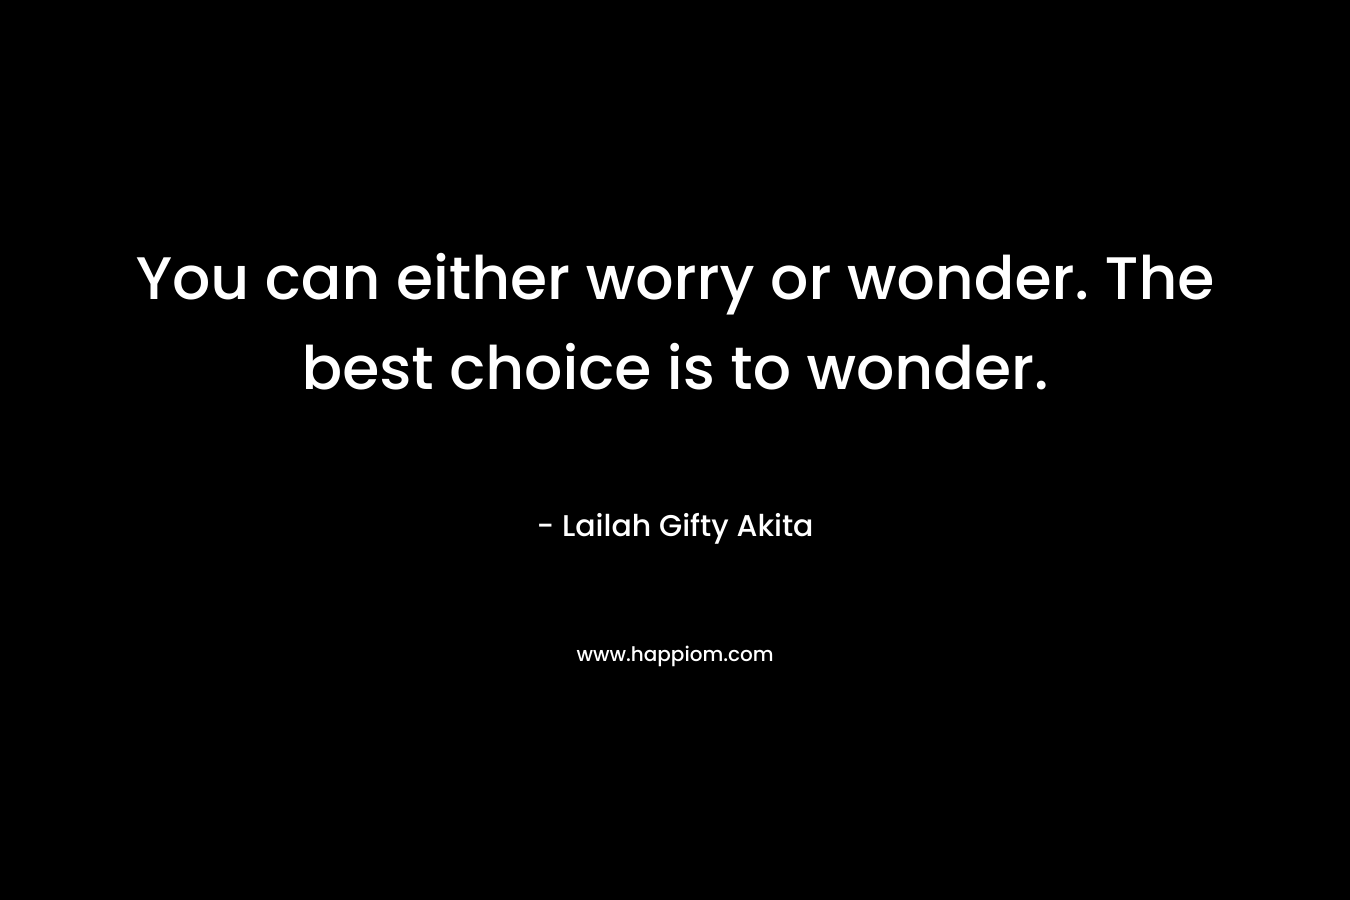 You can either worry or wonder. The best choice is to wonder.